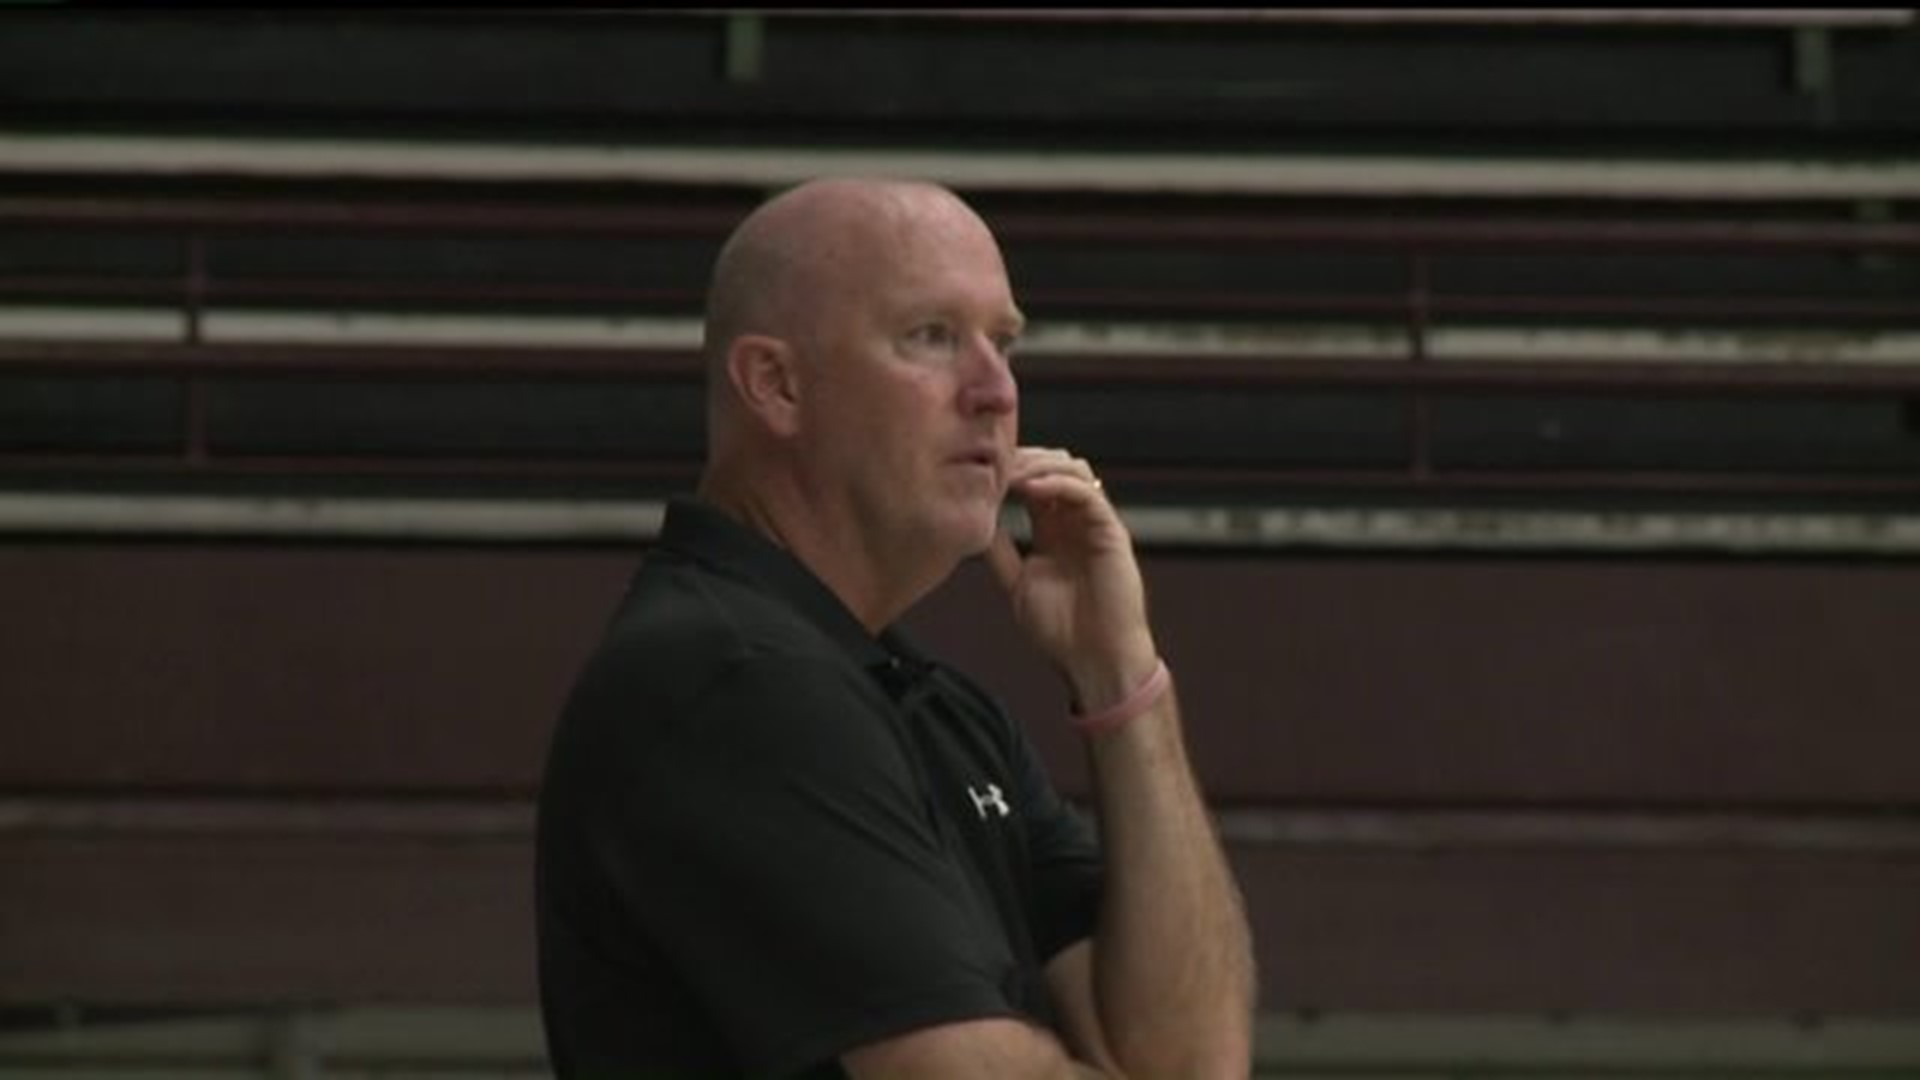 Sean taylor takes over at Moline